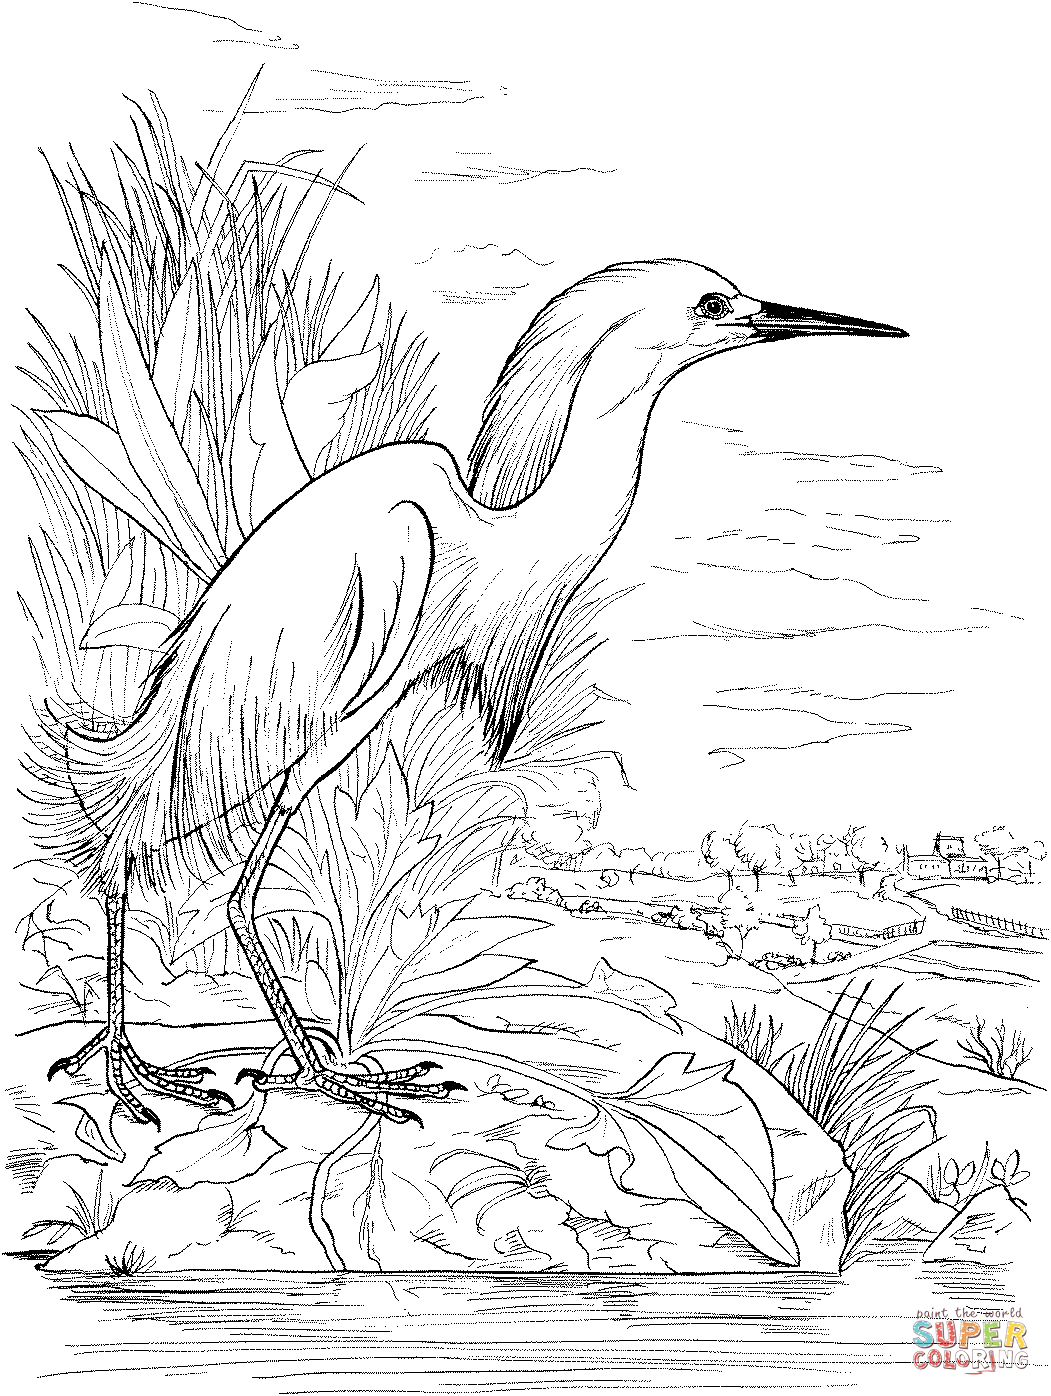 Snowy Egret on the Lake coloring page | Coloring pages, Free coloring pages,  Animal templates